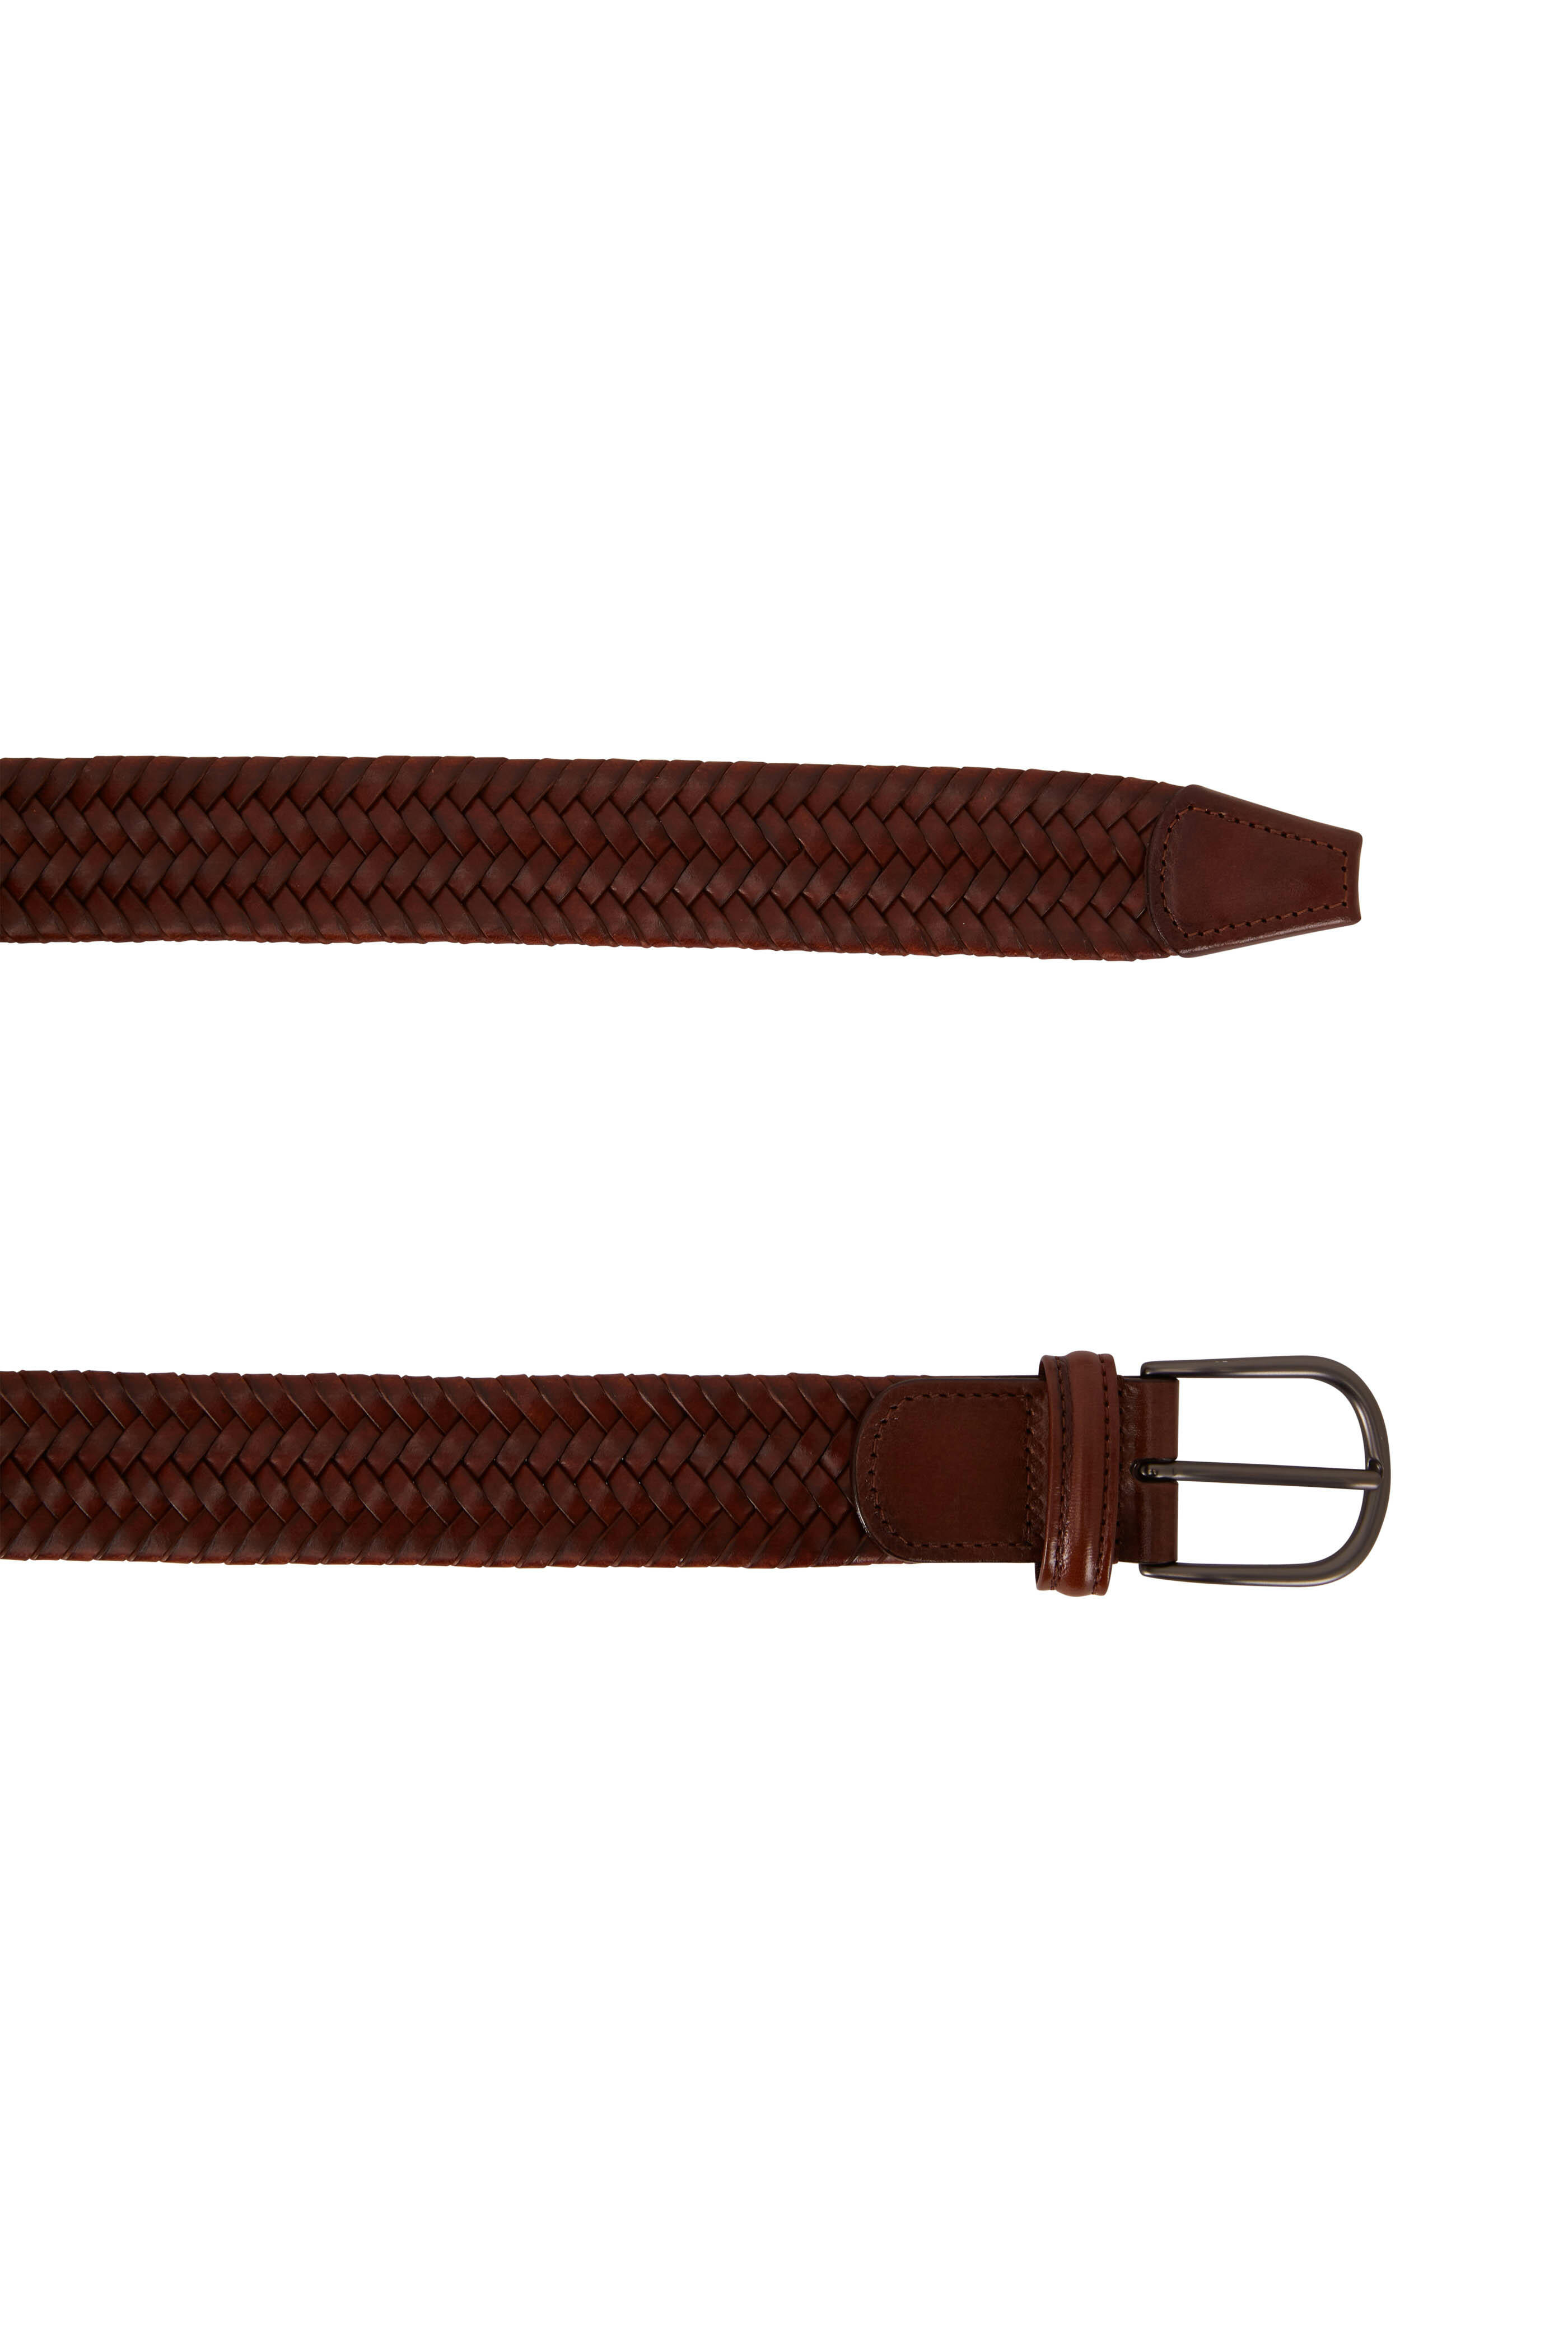 Anderson's Braided Leather Belt: Dark Brown – Trunk Clothiers US